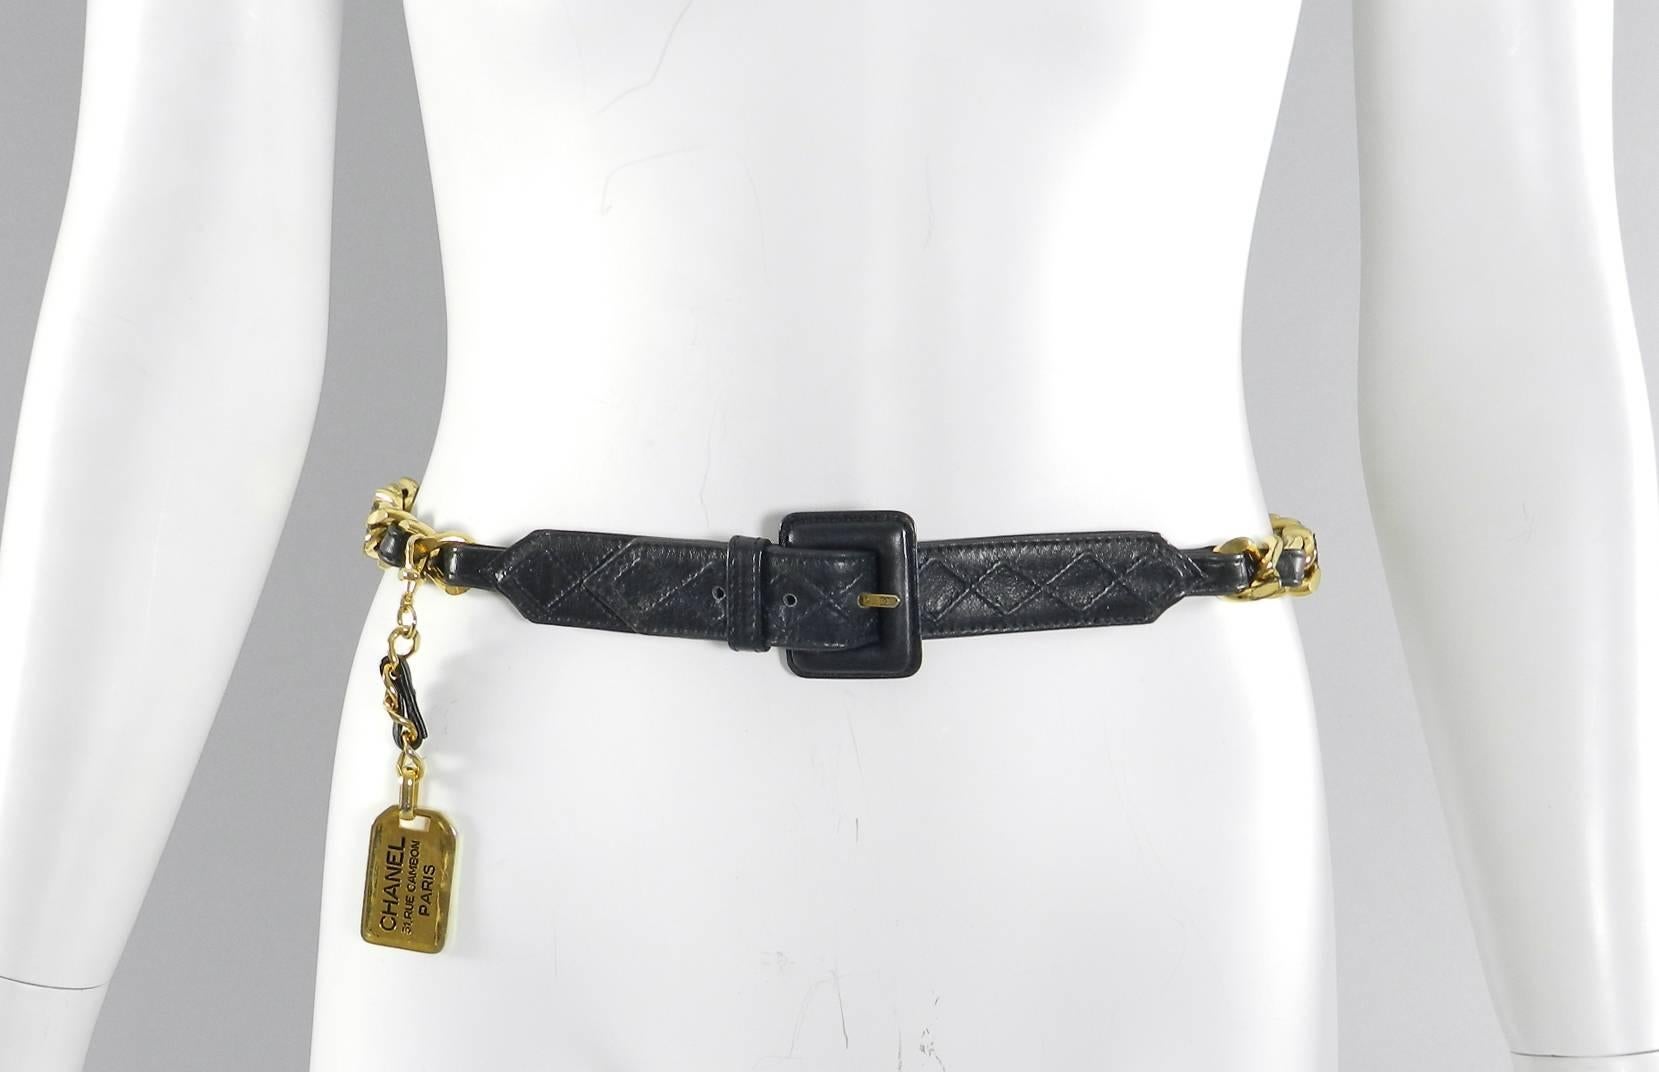 Chanel Vintage 1980's goldtone Chain Lambskin Leather Belt With Luggage Tag. Heavy gilt chain design with soft black lambskin leather and goldtone removable luggage chain drop. Marked Chanel on hook clasp and on luggage tag. Fastens at 20, 30, 31